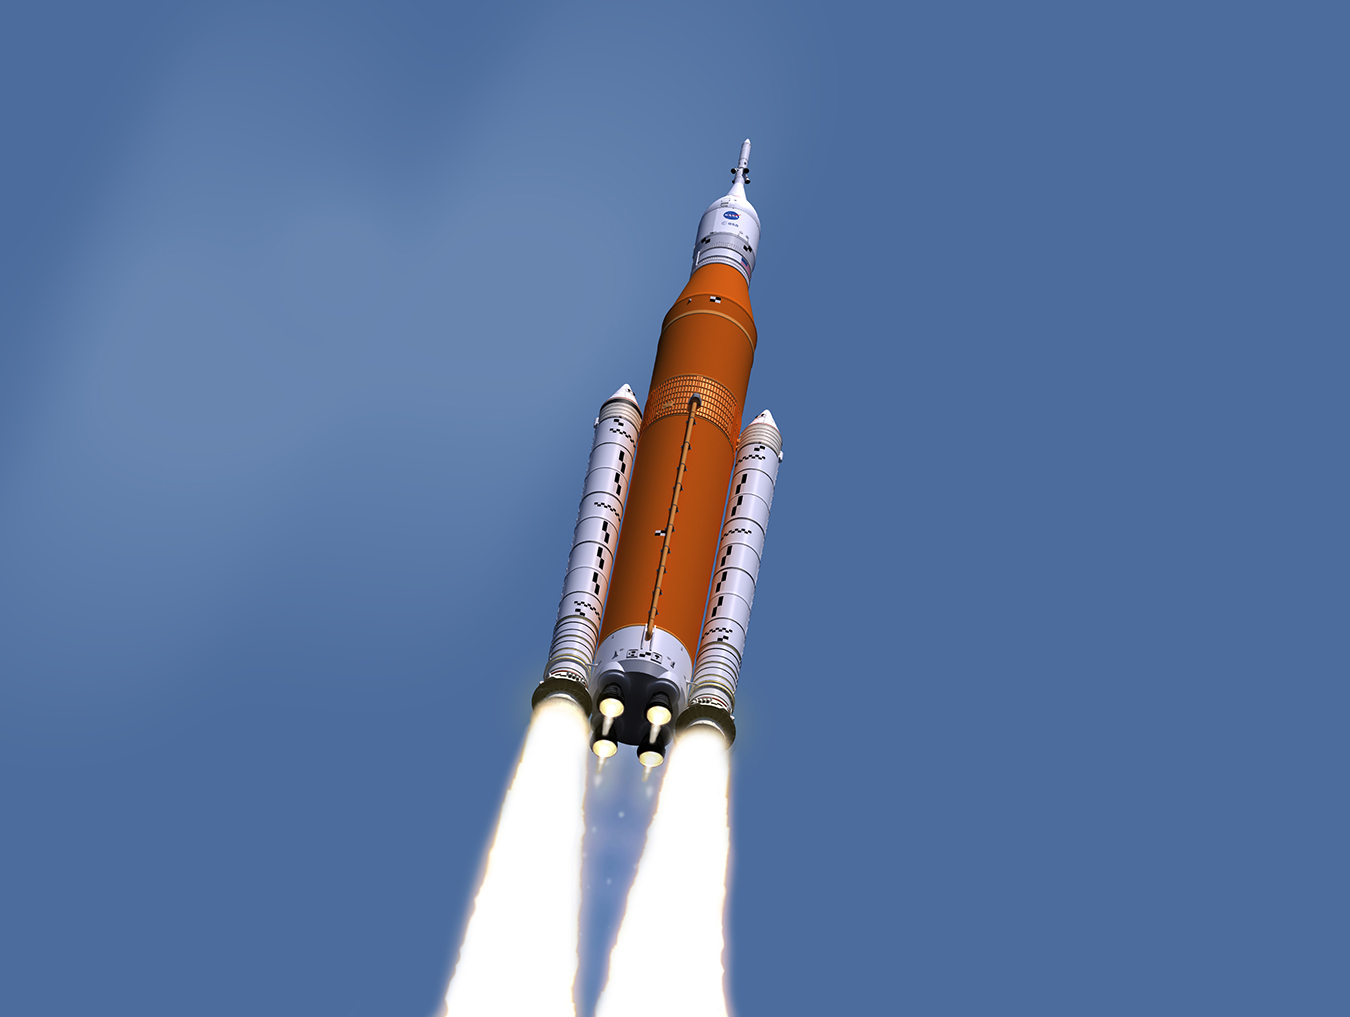 Illustration of Space Launch System.